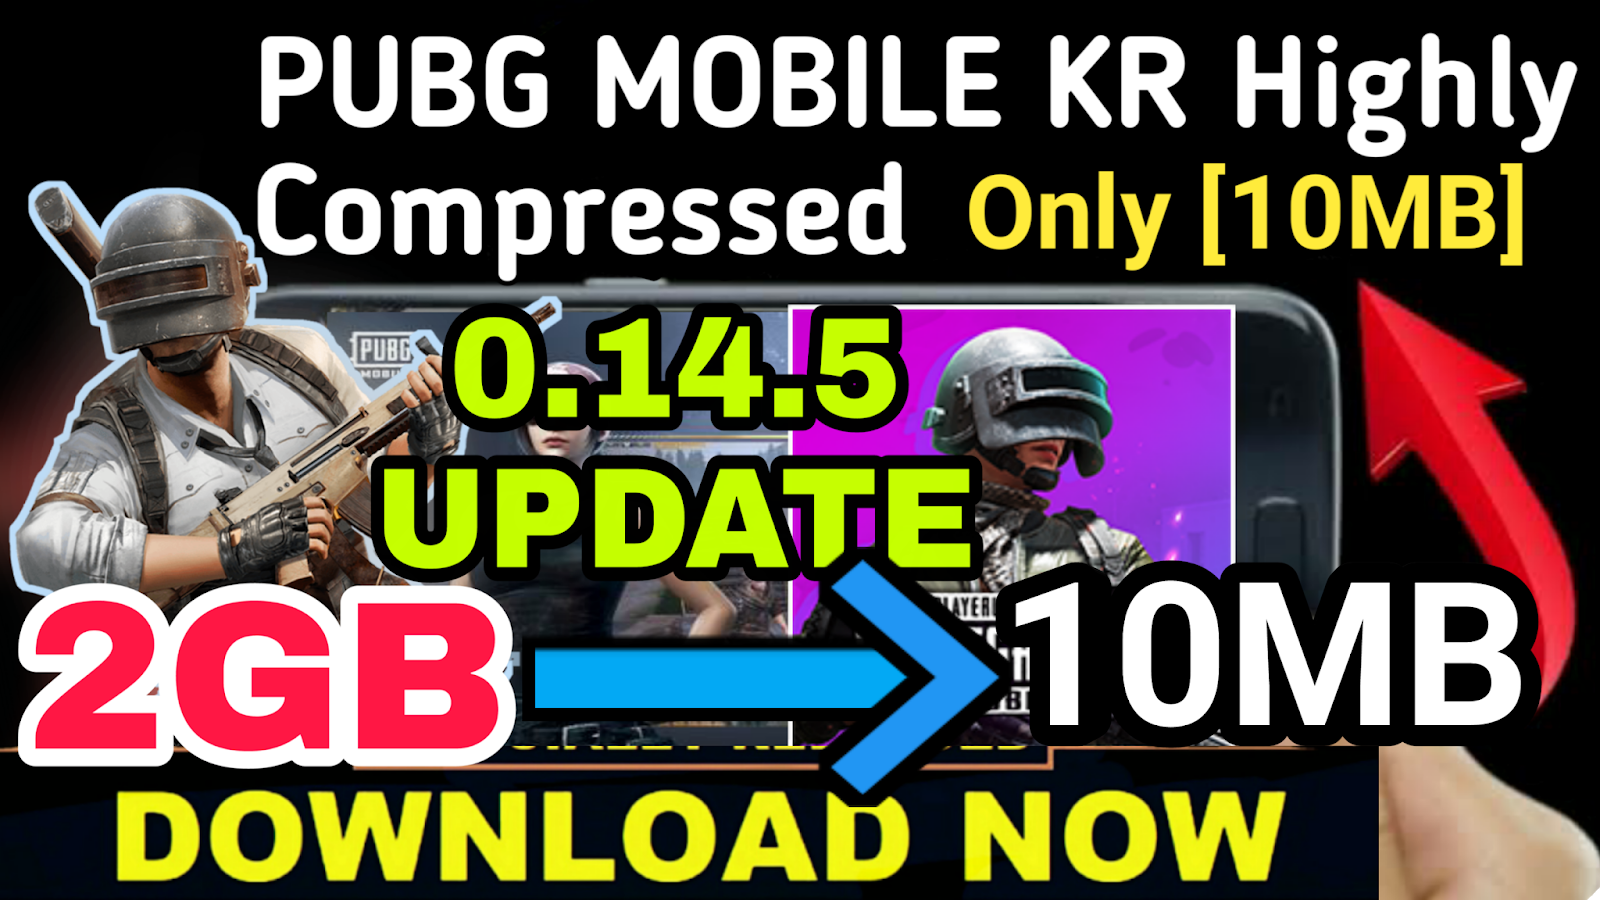 PUBG MOBILE KR - Download Paid Android Apps & Games for free